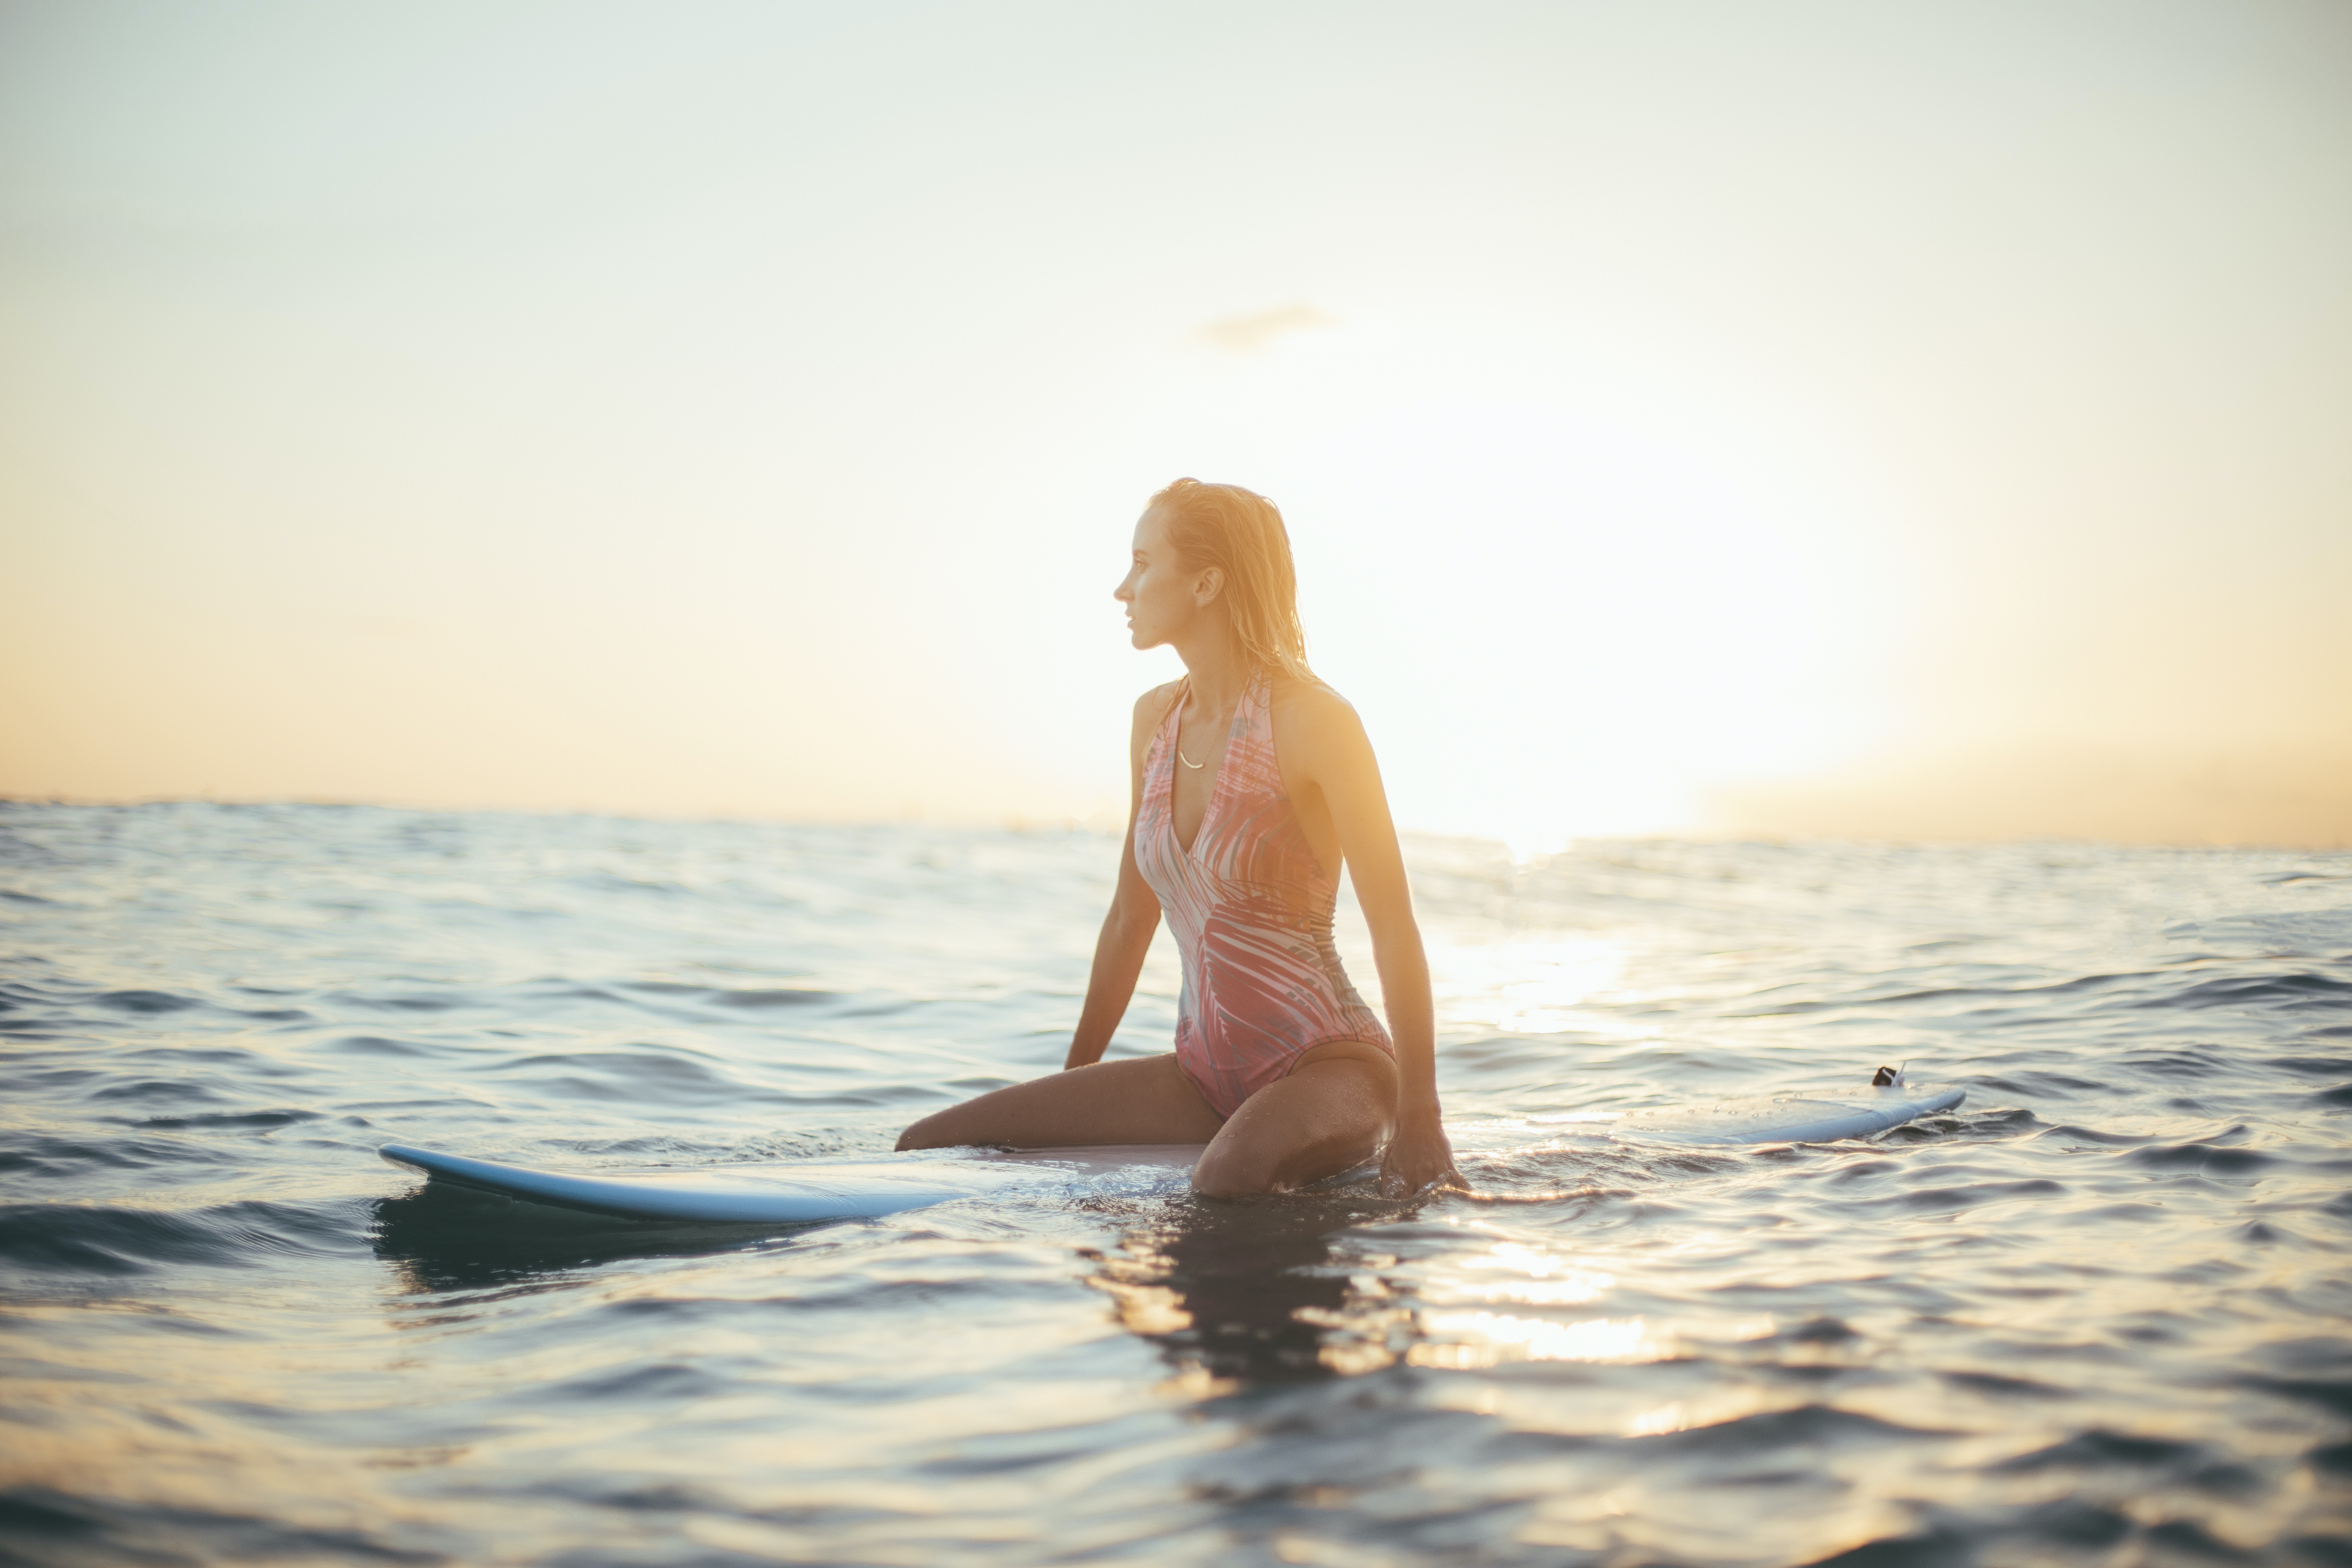 A woman out at sea on a surfboard. | Source: Unsplash